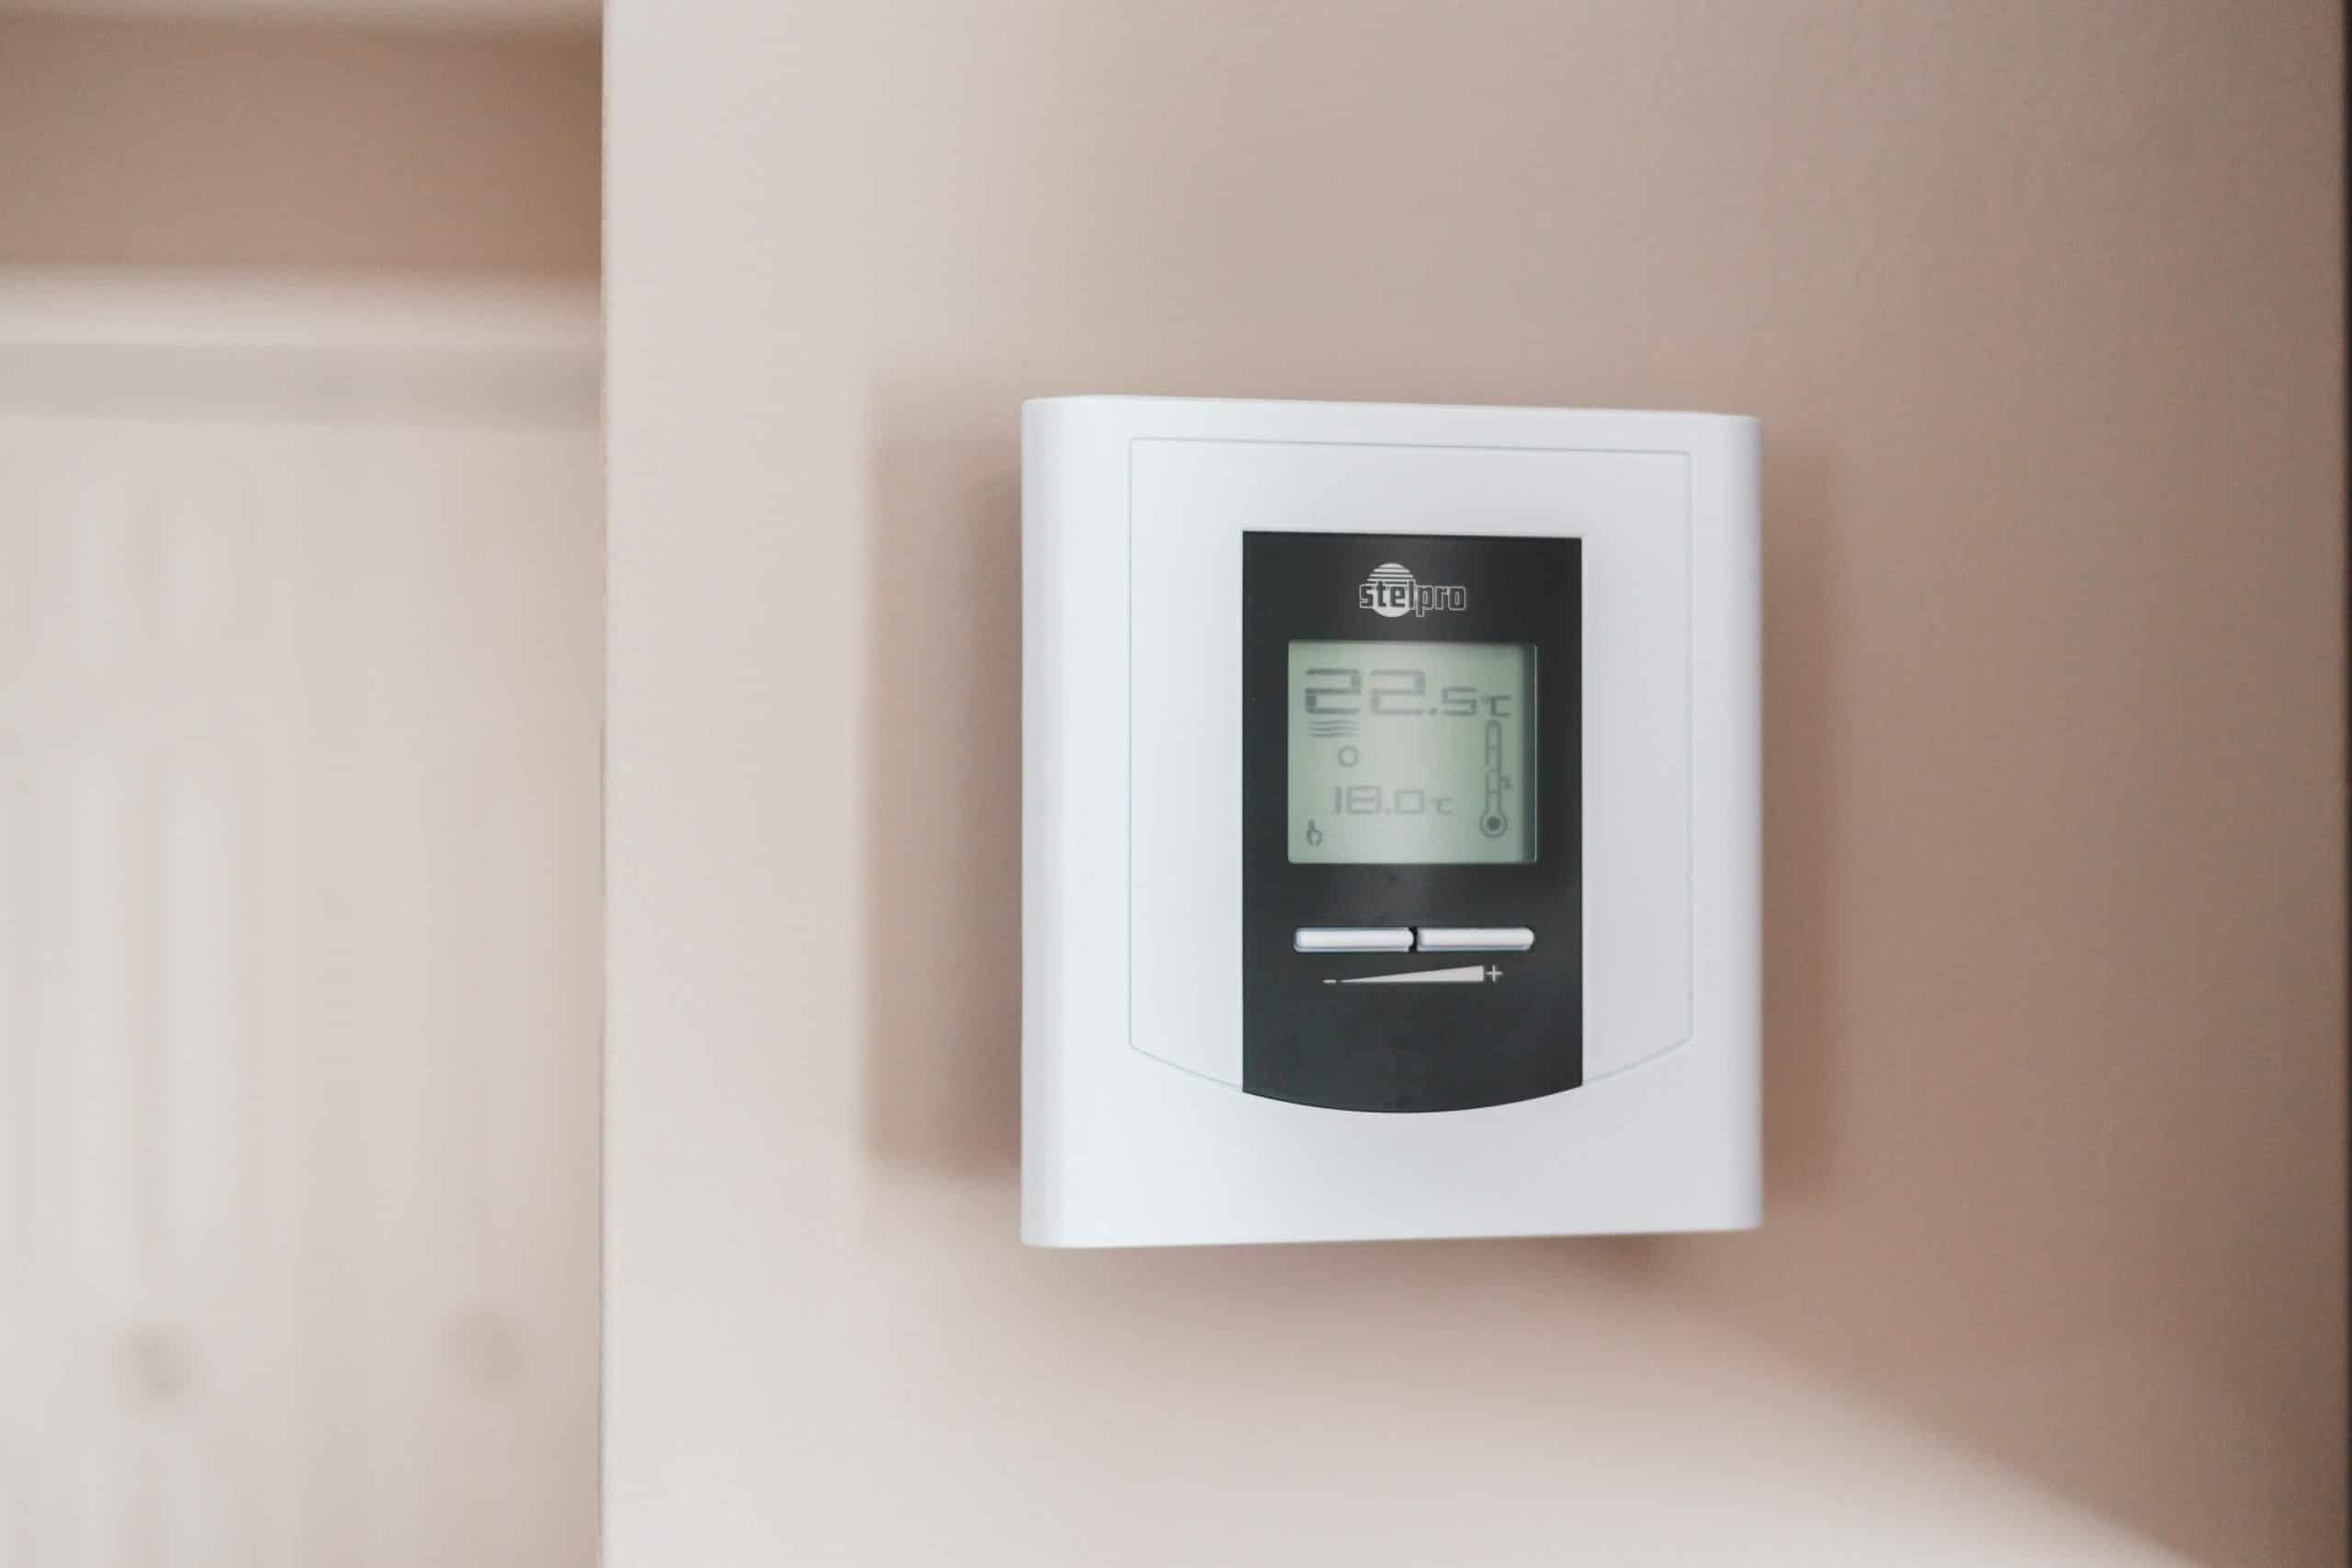 Thermostat mounted to wall